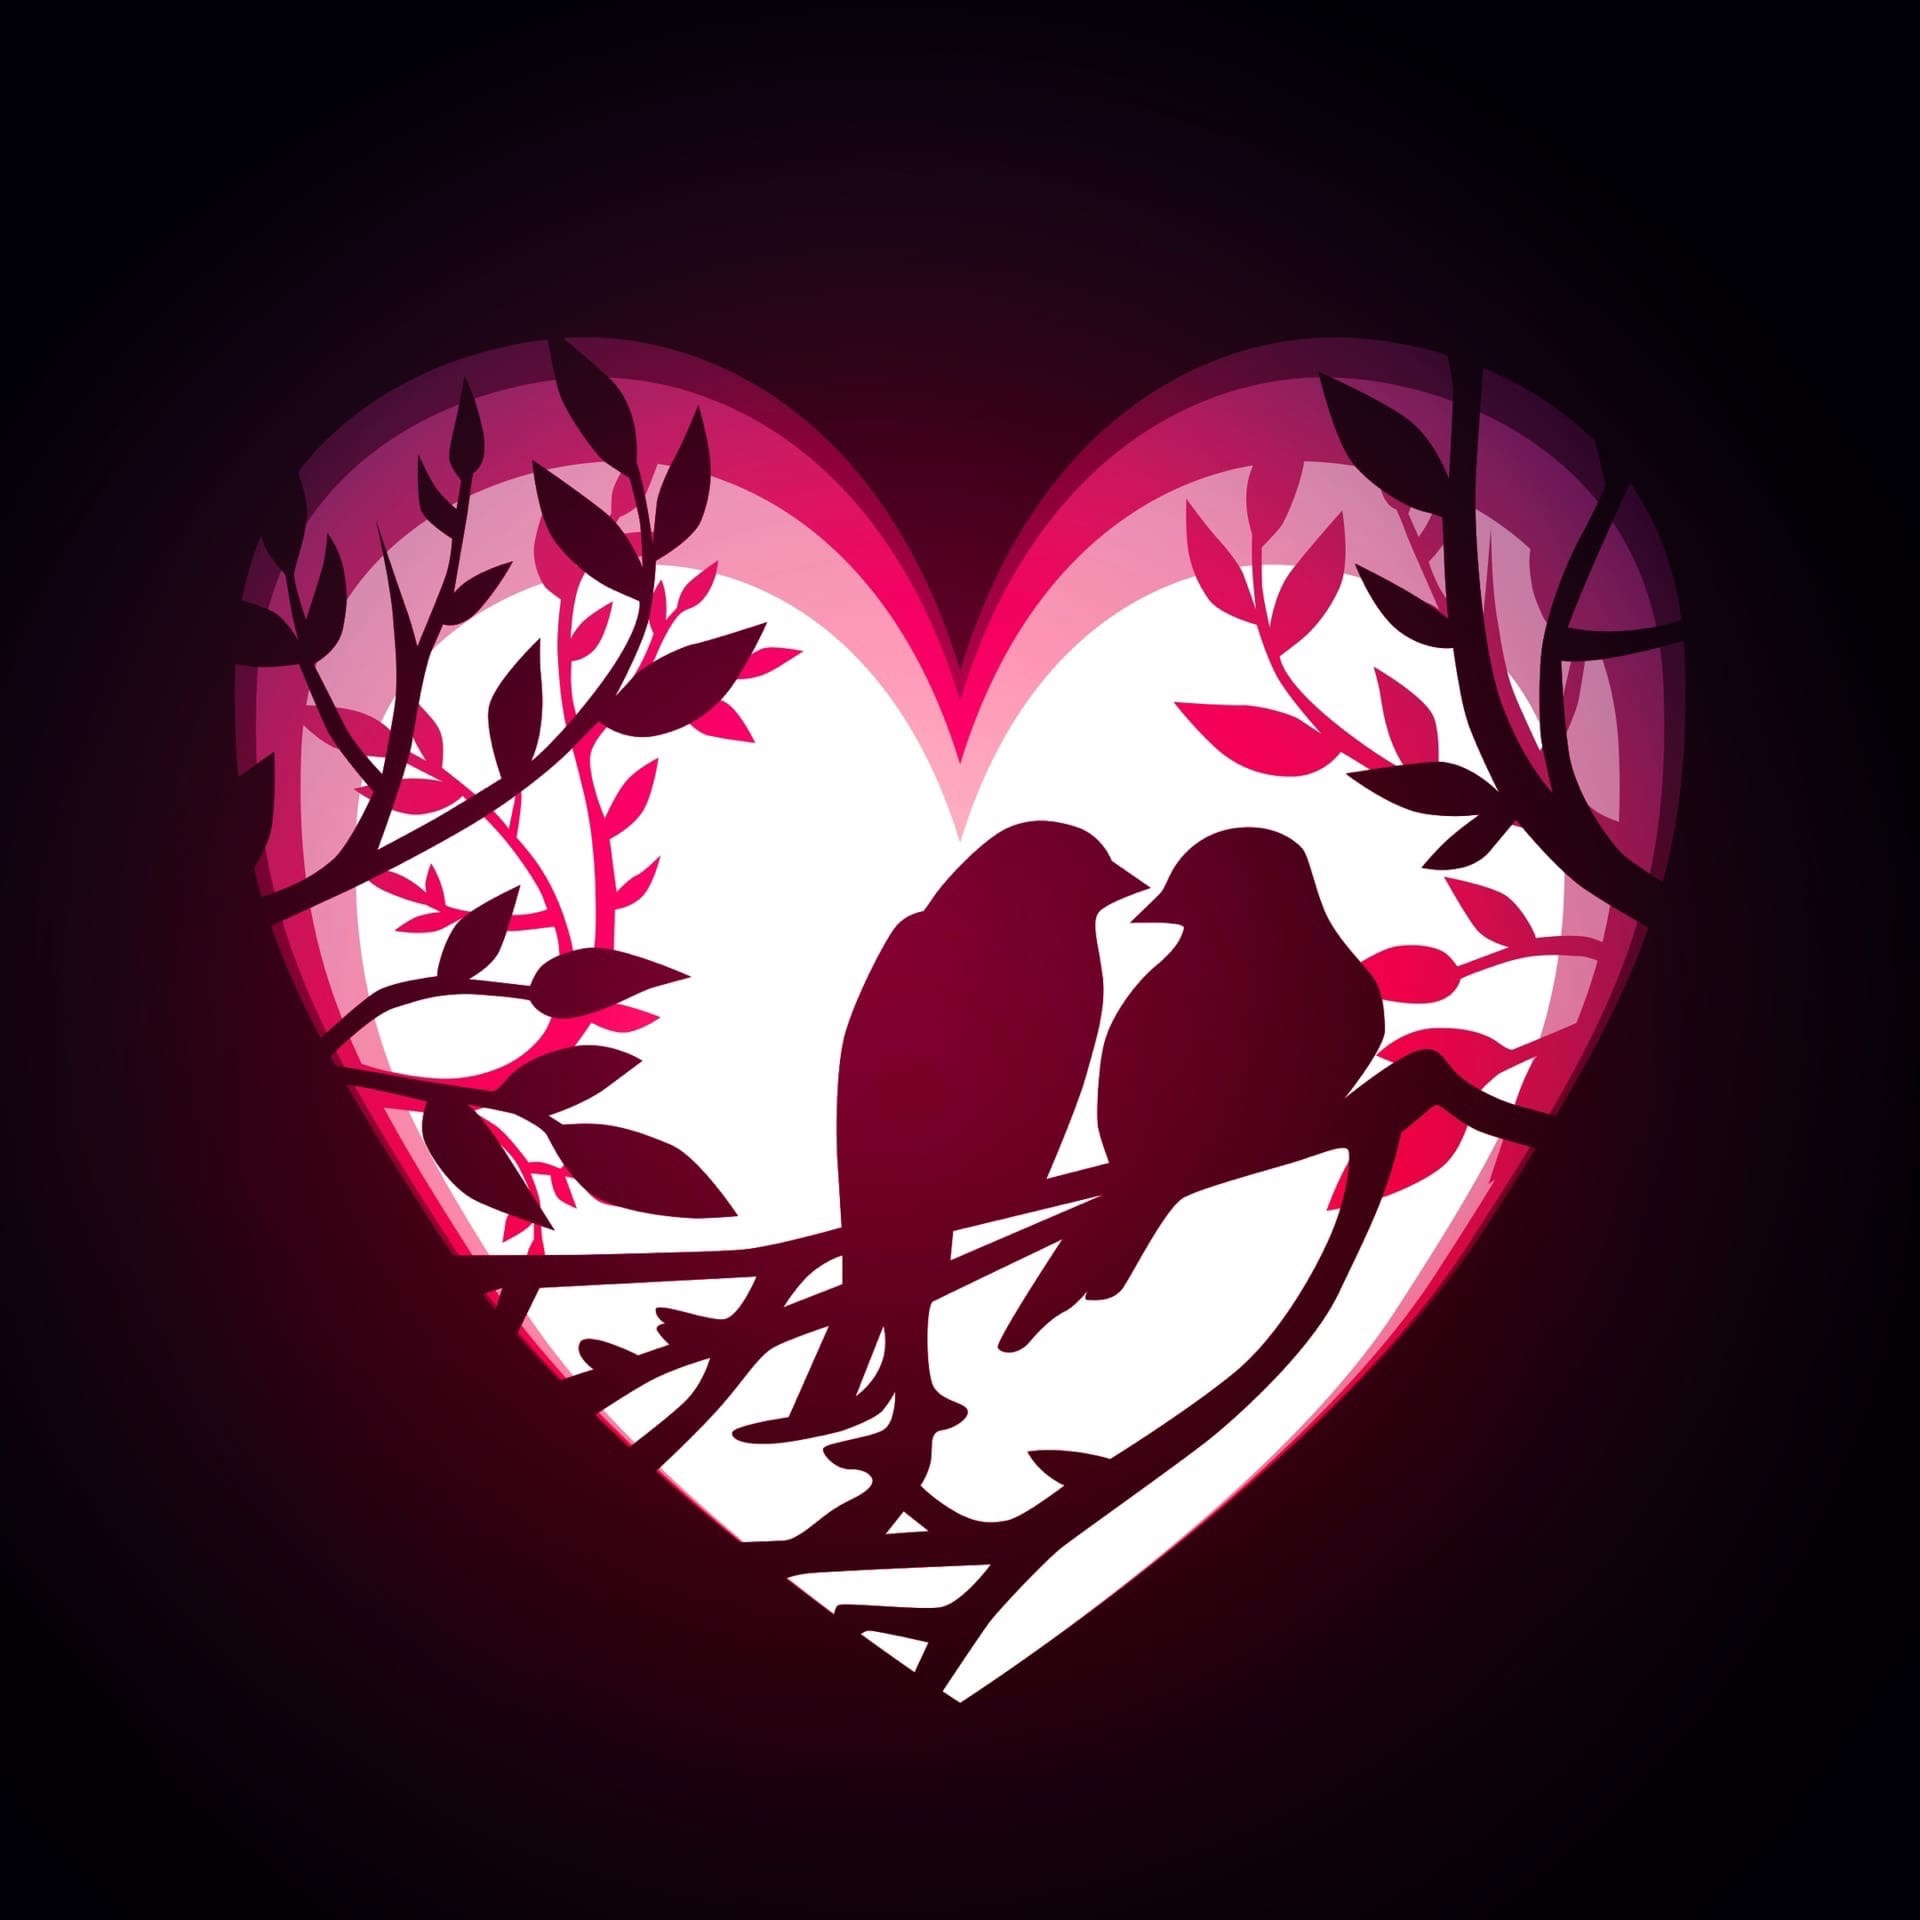 Love Birds Layered Decorfor Laser Cut Free DXF File